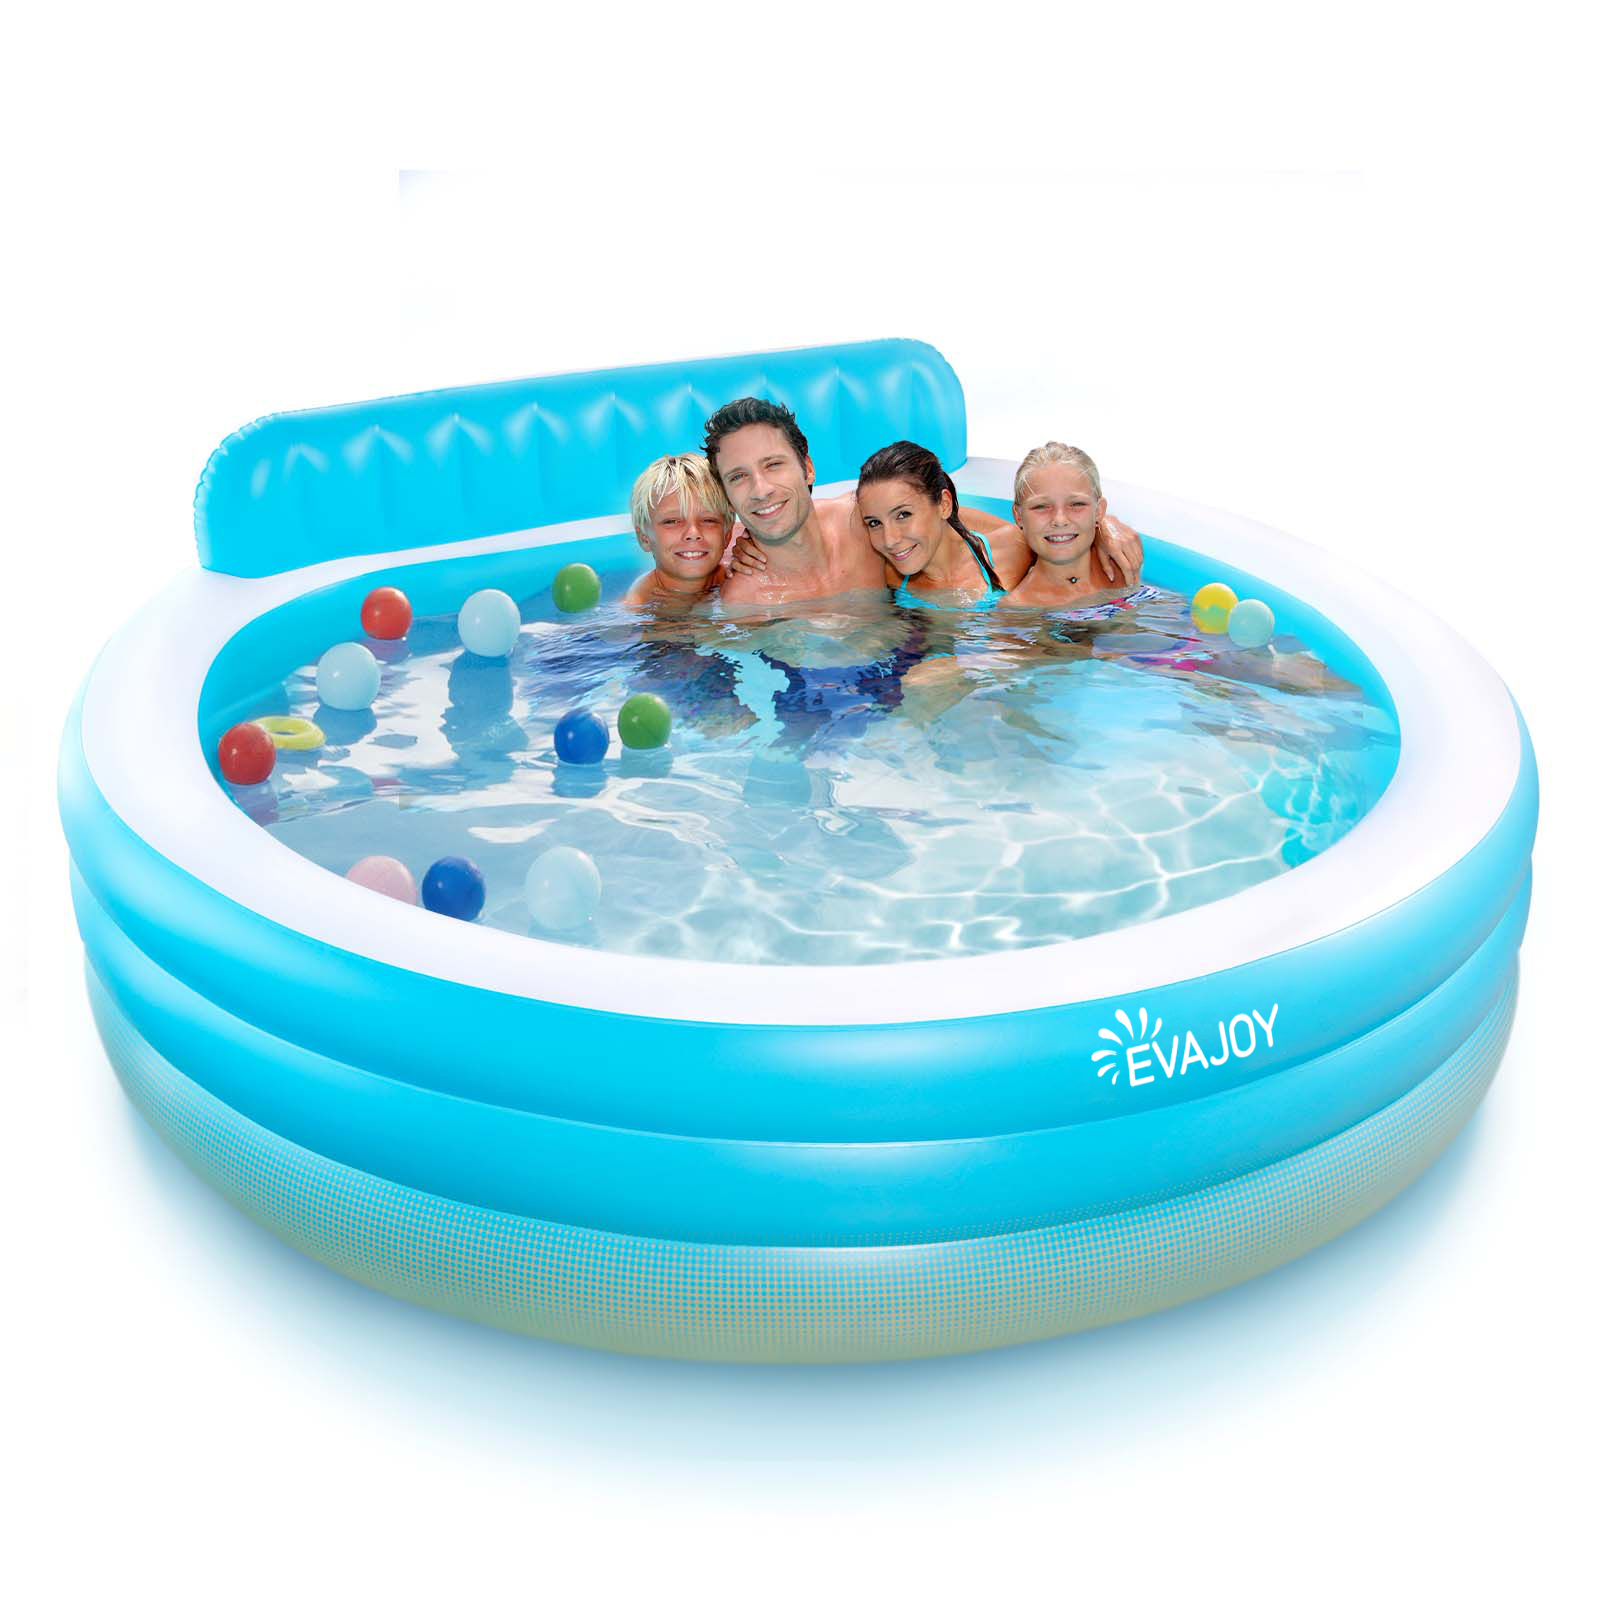 Evajoy Inflatable Pool, Family Lounge Swimming Pool with Seat for Kids Aldult, Round, 7.33 x 7.11 x 2.5 ft - image 1 of 11